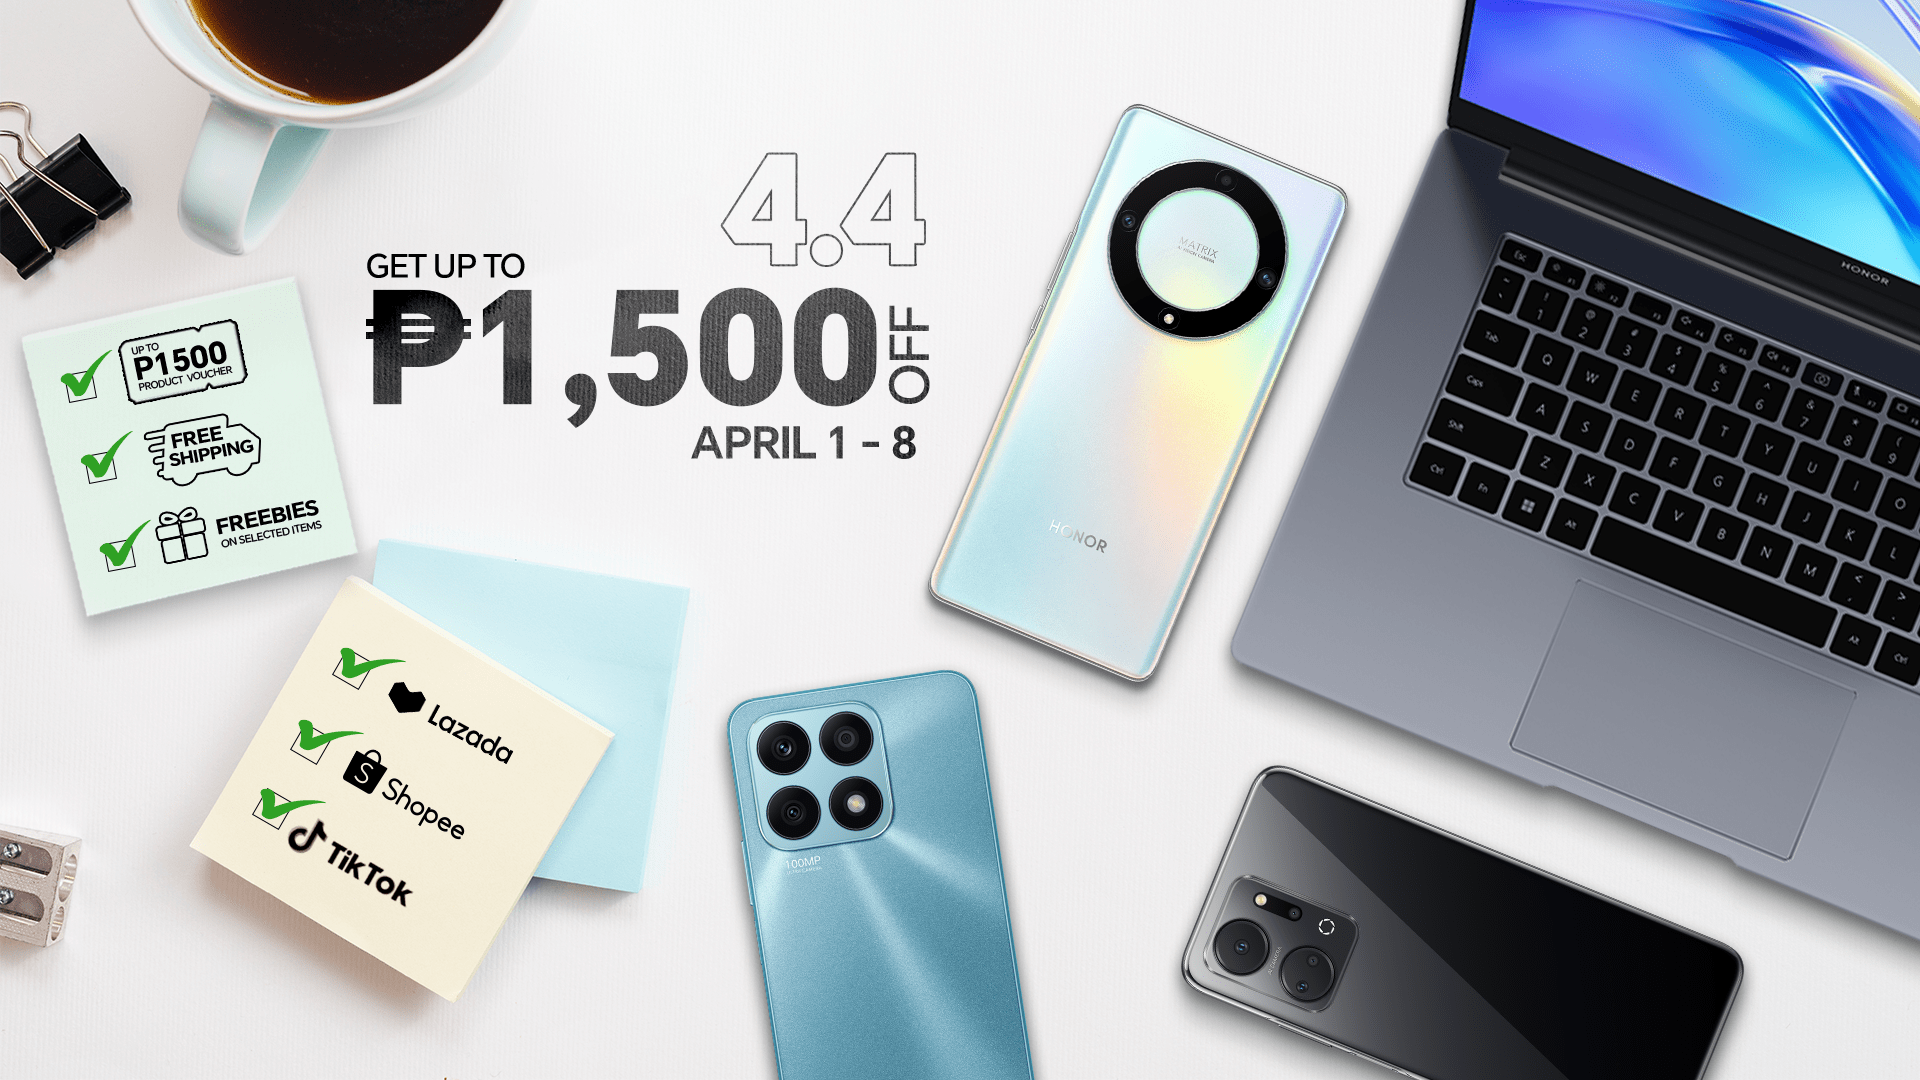 Up to Php 1500 discount on HONOR gadgets this 4.4 Sale!